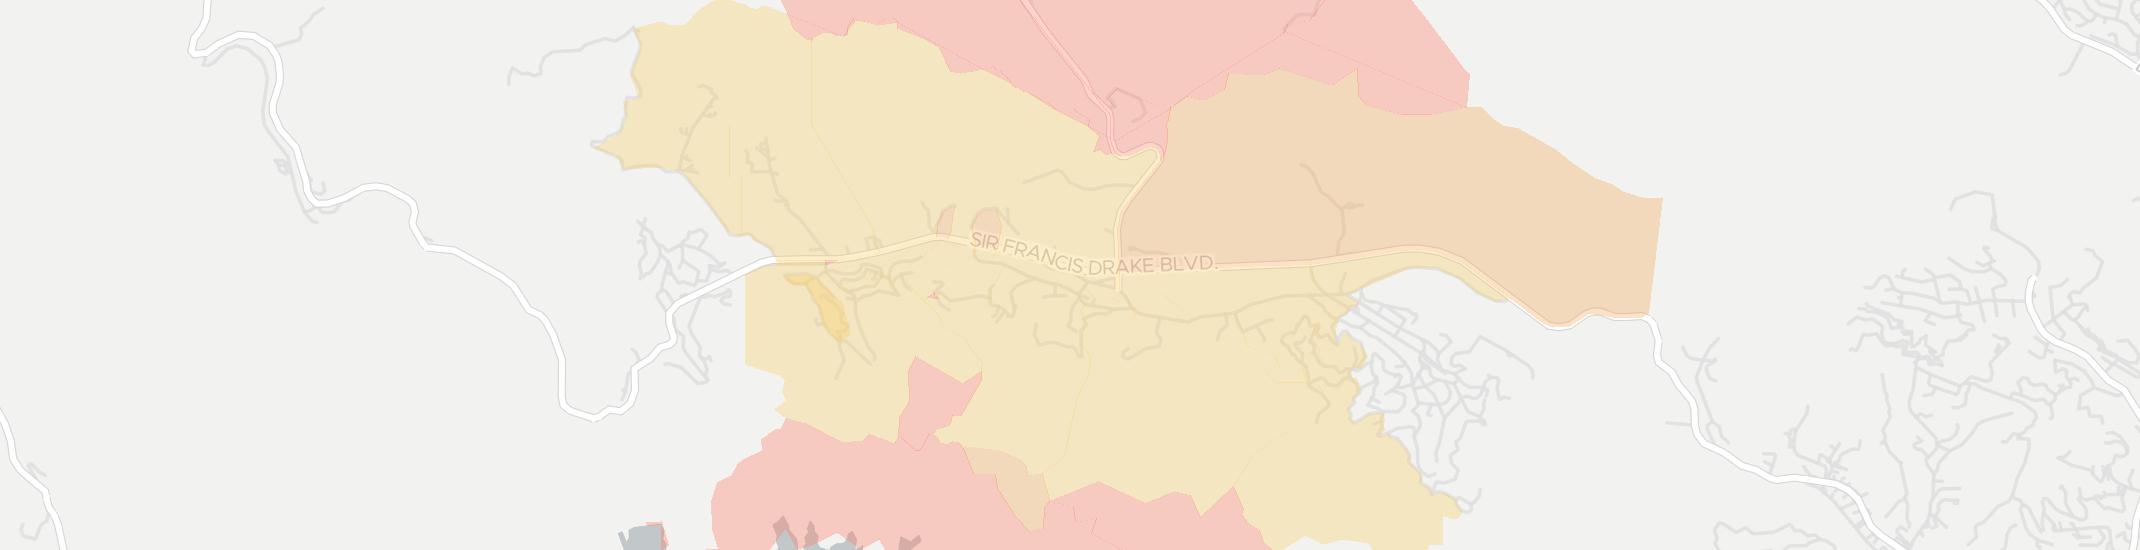 San Geronimo Internet Competition Map. Click for interactive map.